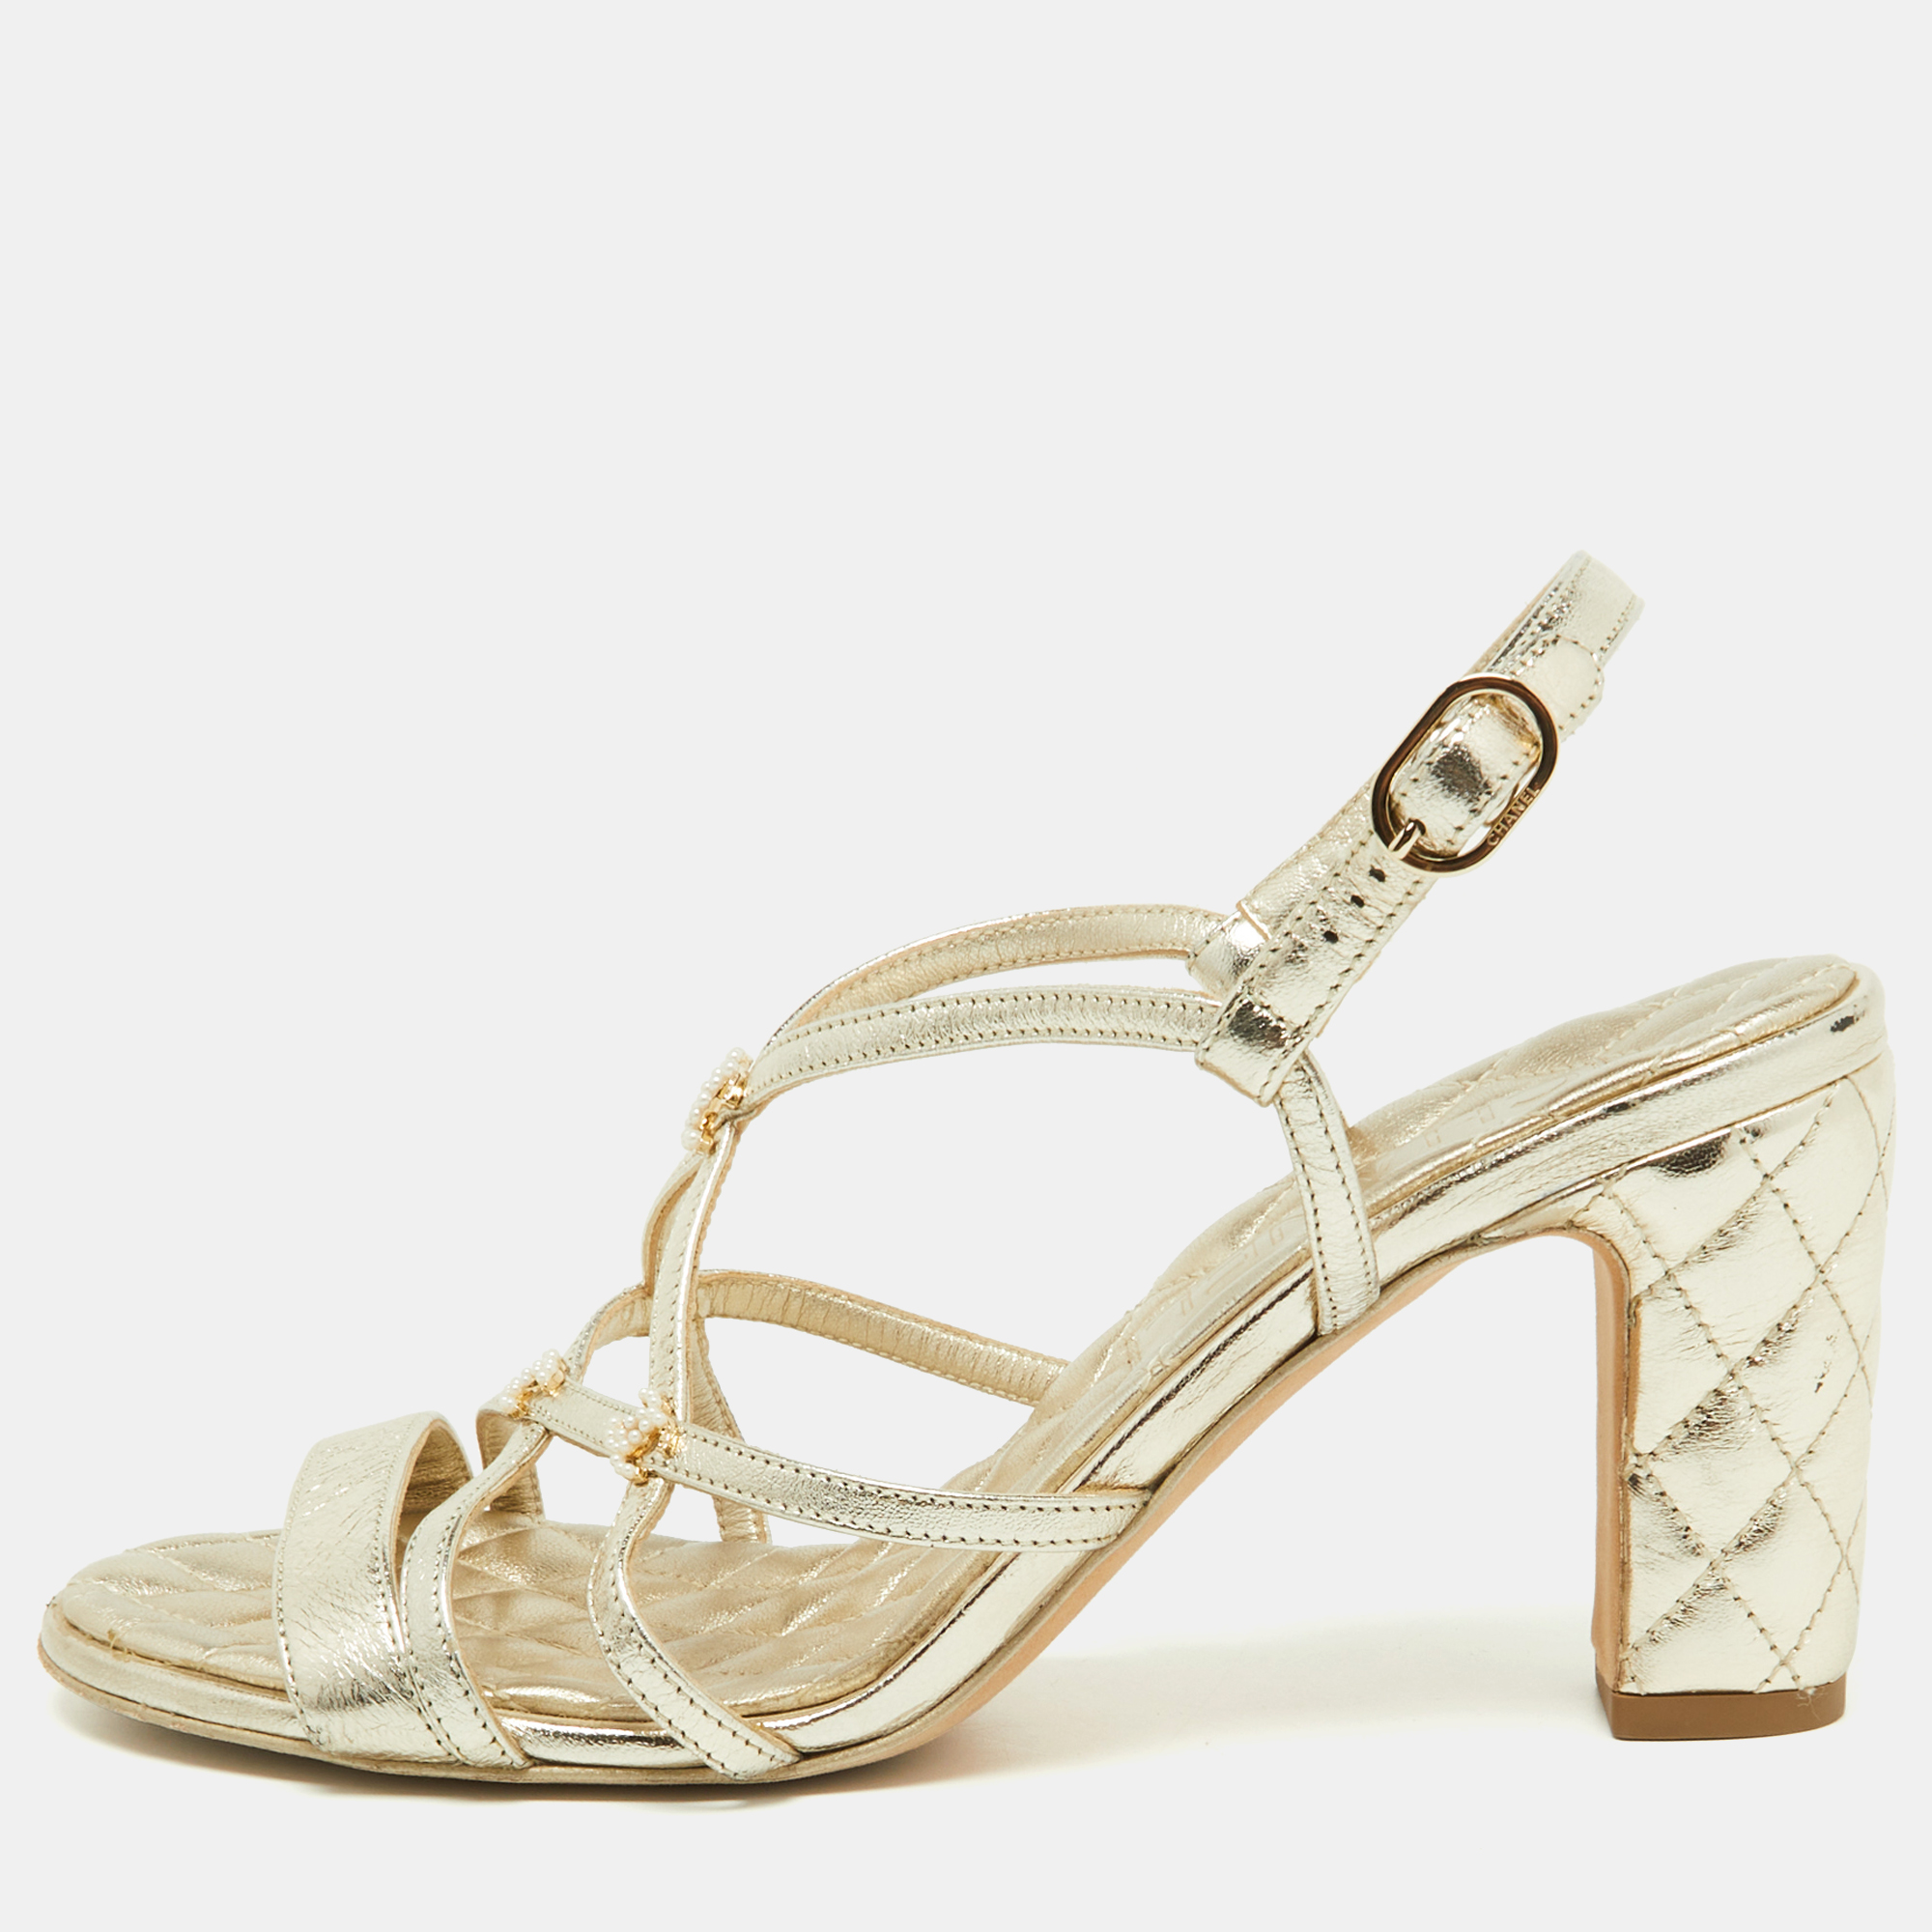 Chanel Light Gold Leather Faux Pearl Embellished CC Ankle Strap Block Heel Sandals Size 36.5